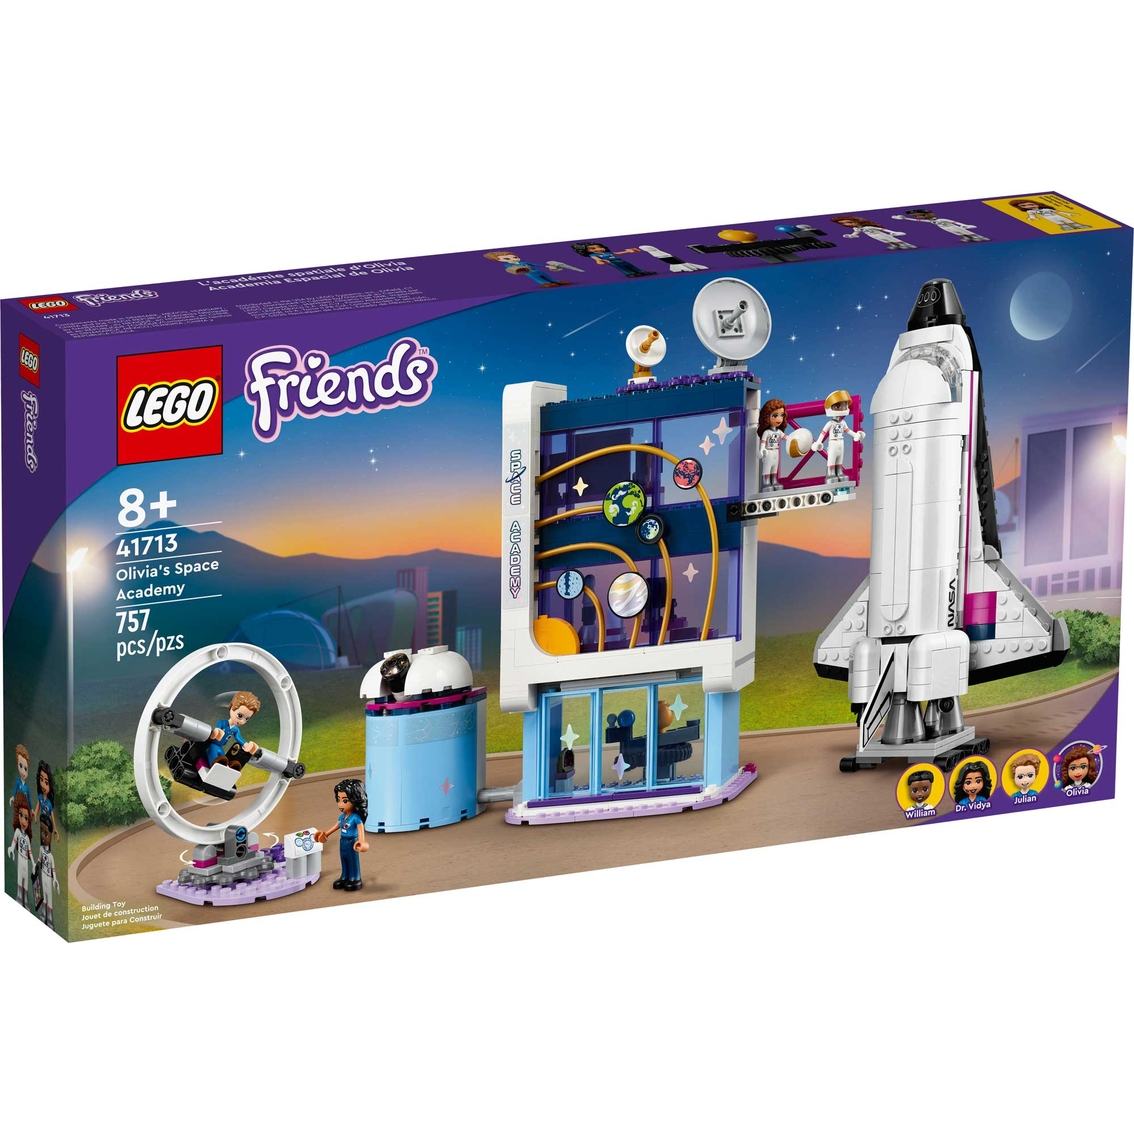 LEGO Friends Olivia's Space Academy 41713 - Image 1 of 3